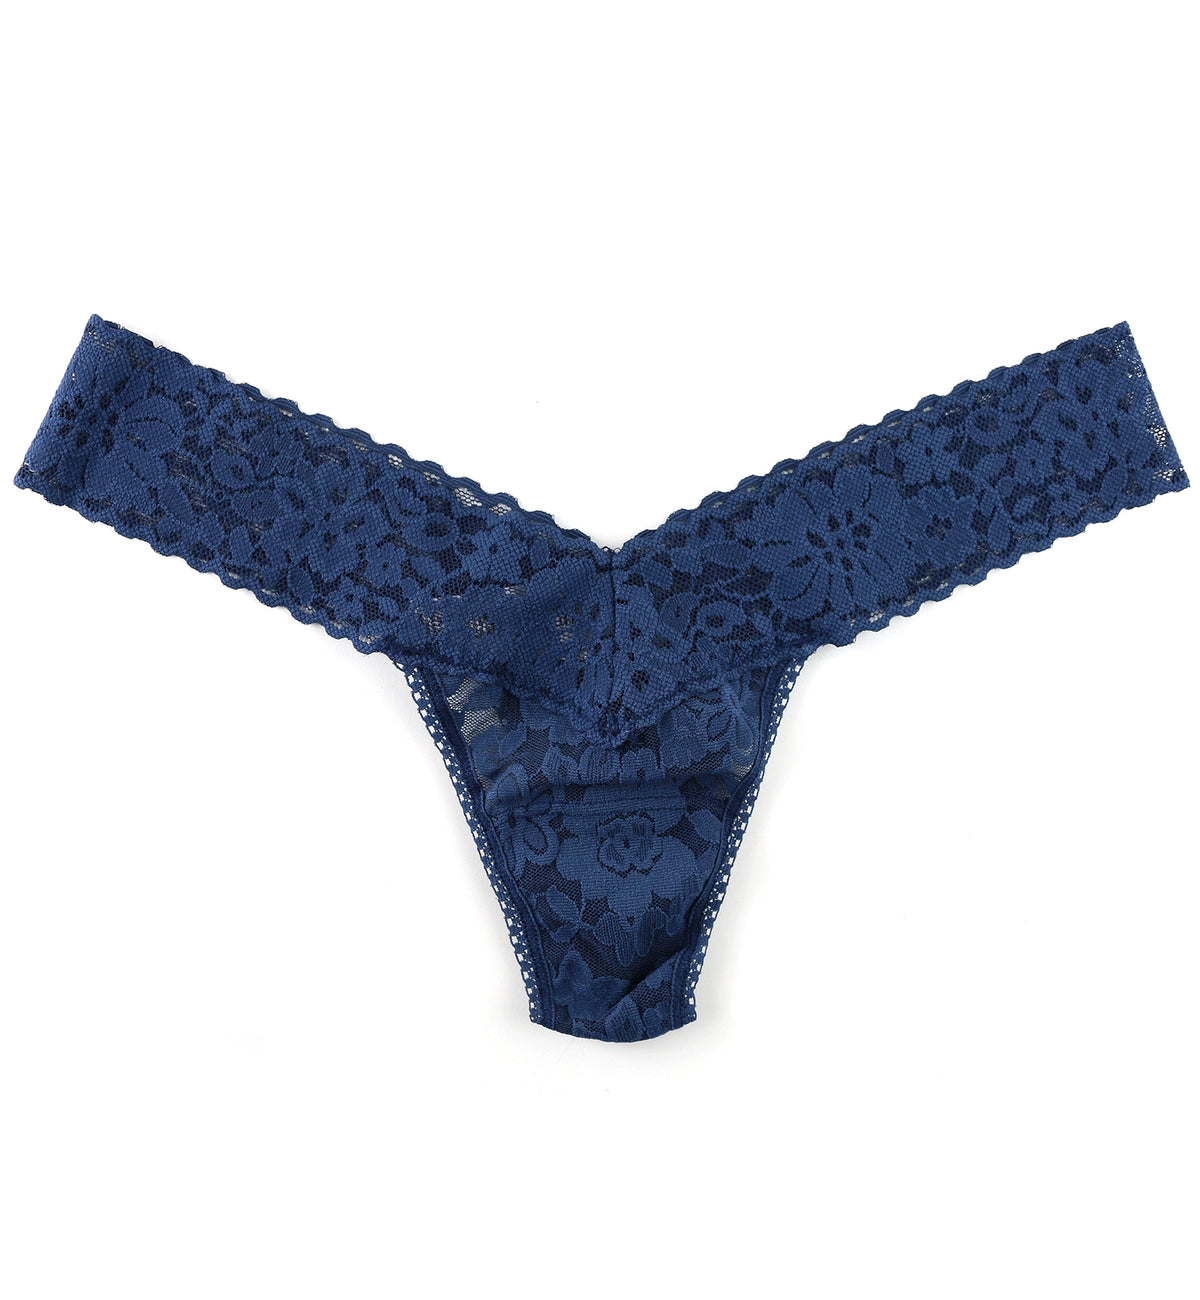 Hanky Panky Daily Lace Low Rise Thong (771001P),Nightshade - Nightshade,One Size